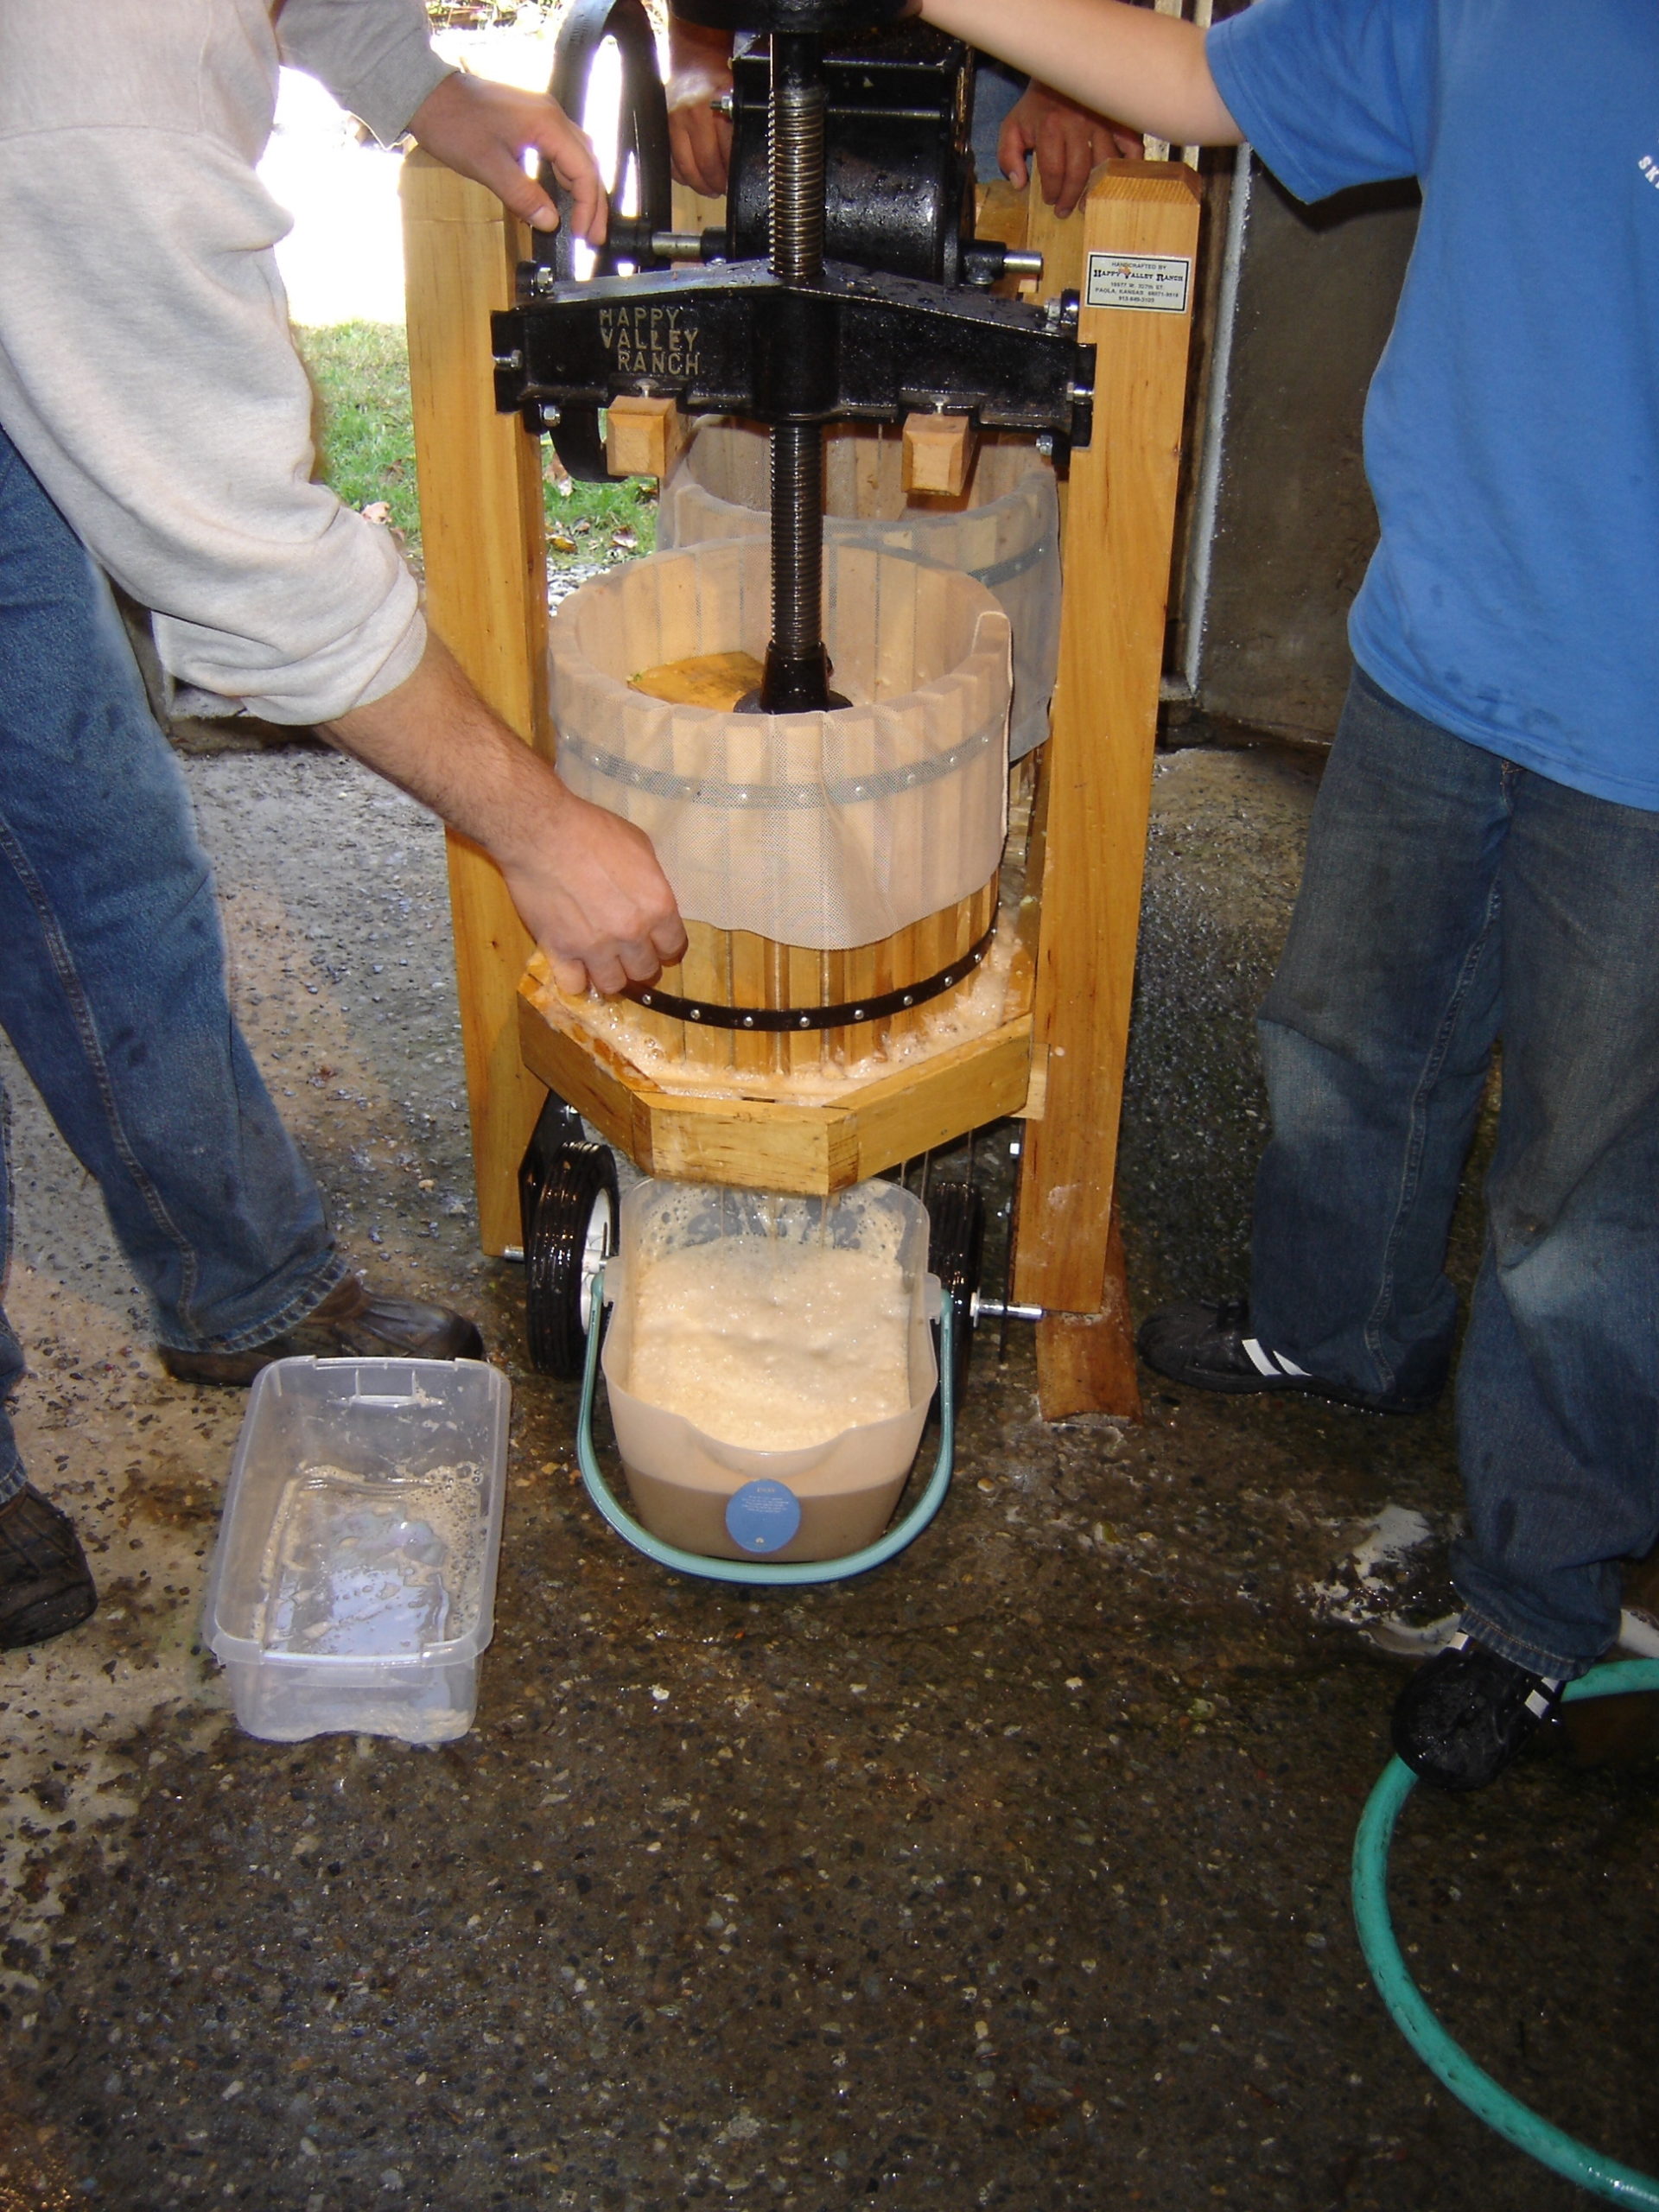 Using a manual screw-type press, the mash is pressed out and leaks into the trough under the basket then through a hole into the pail below.  A bushel of apples will yield two or more gallons of cider.  The cider is then decanted into pint, quart and gallon plastic jugs. The used mash is then put on the compost pile.